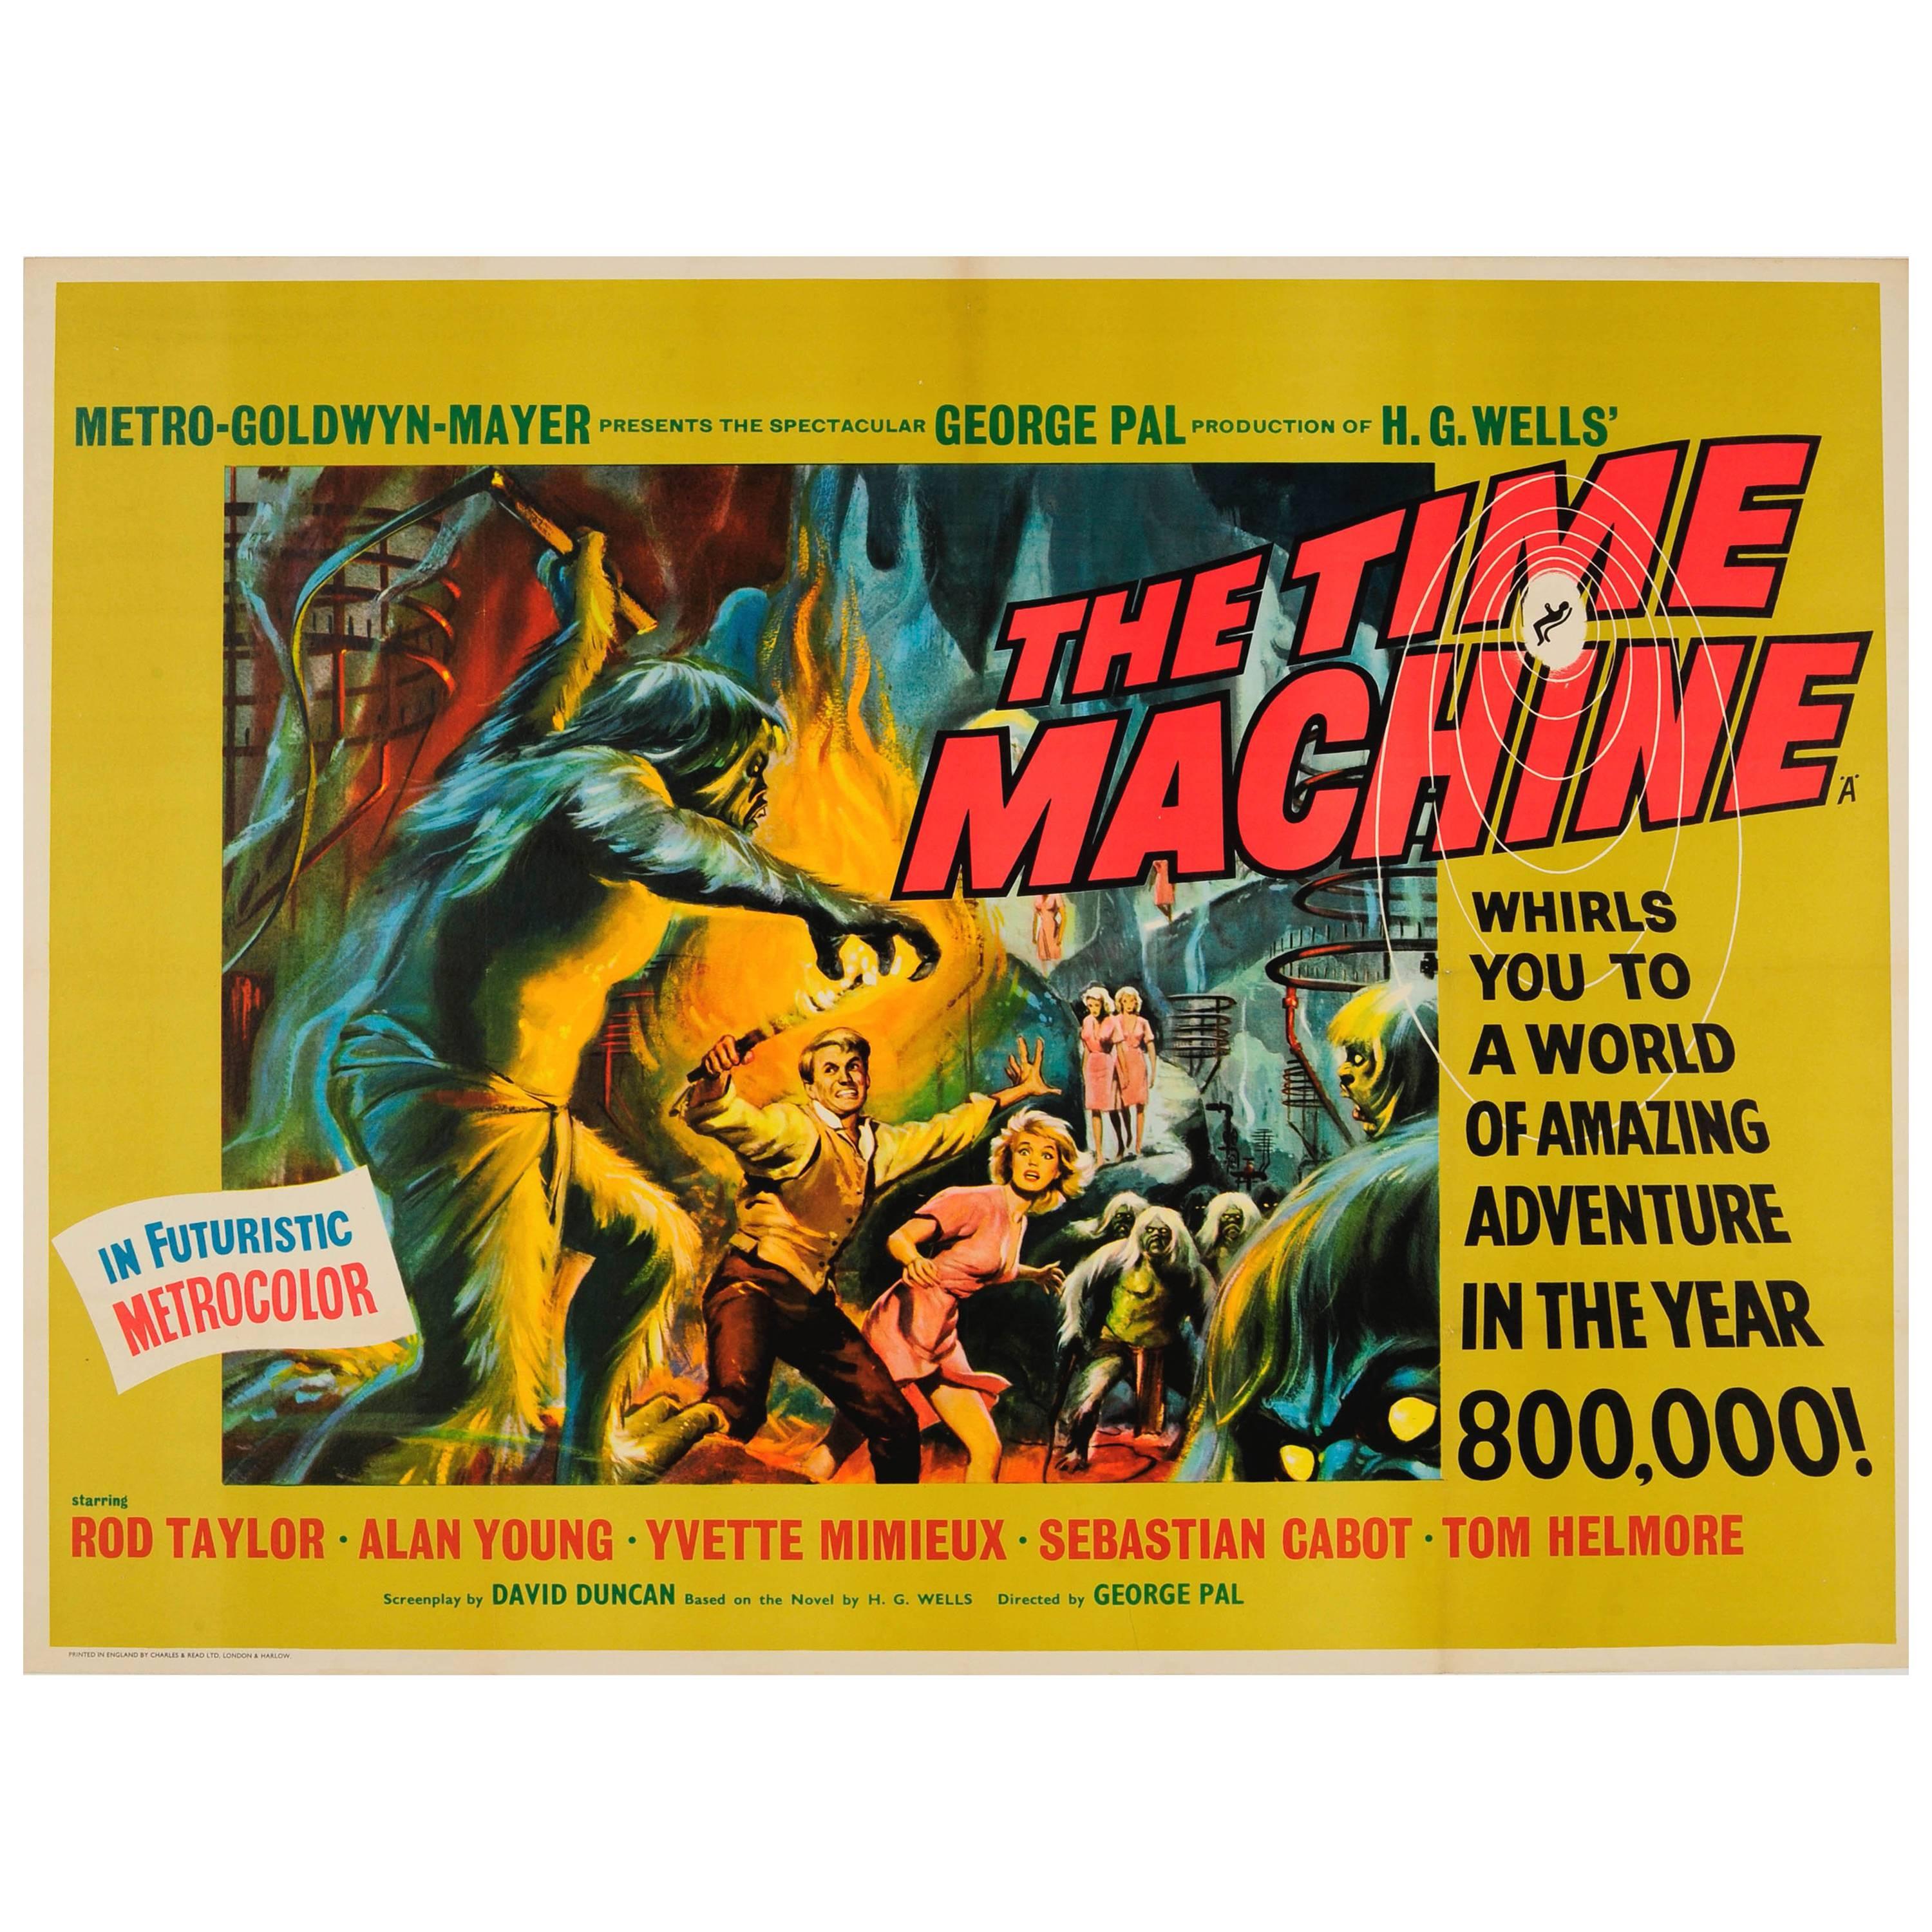 Original Vintage Science Fiction Movie Poster for the Time Machine by H.G. Wells